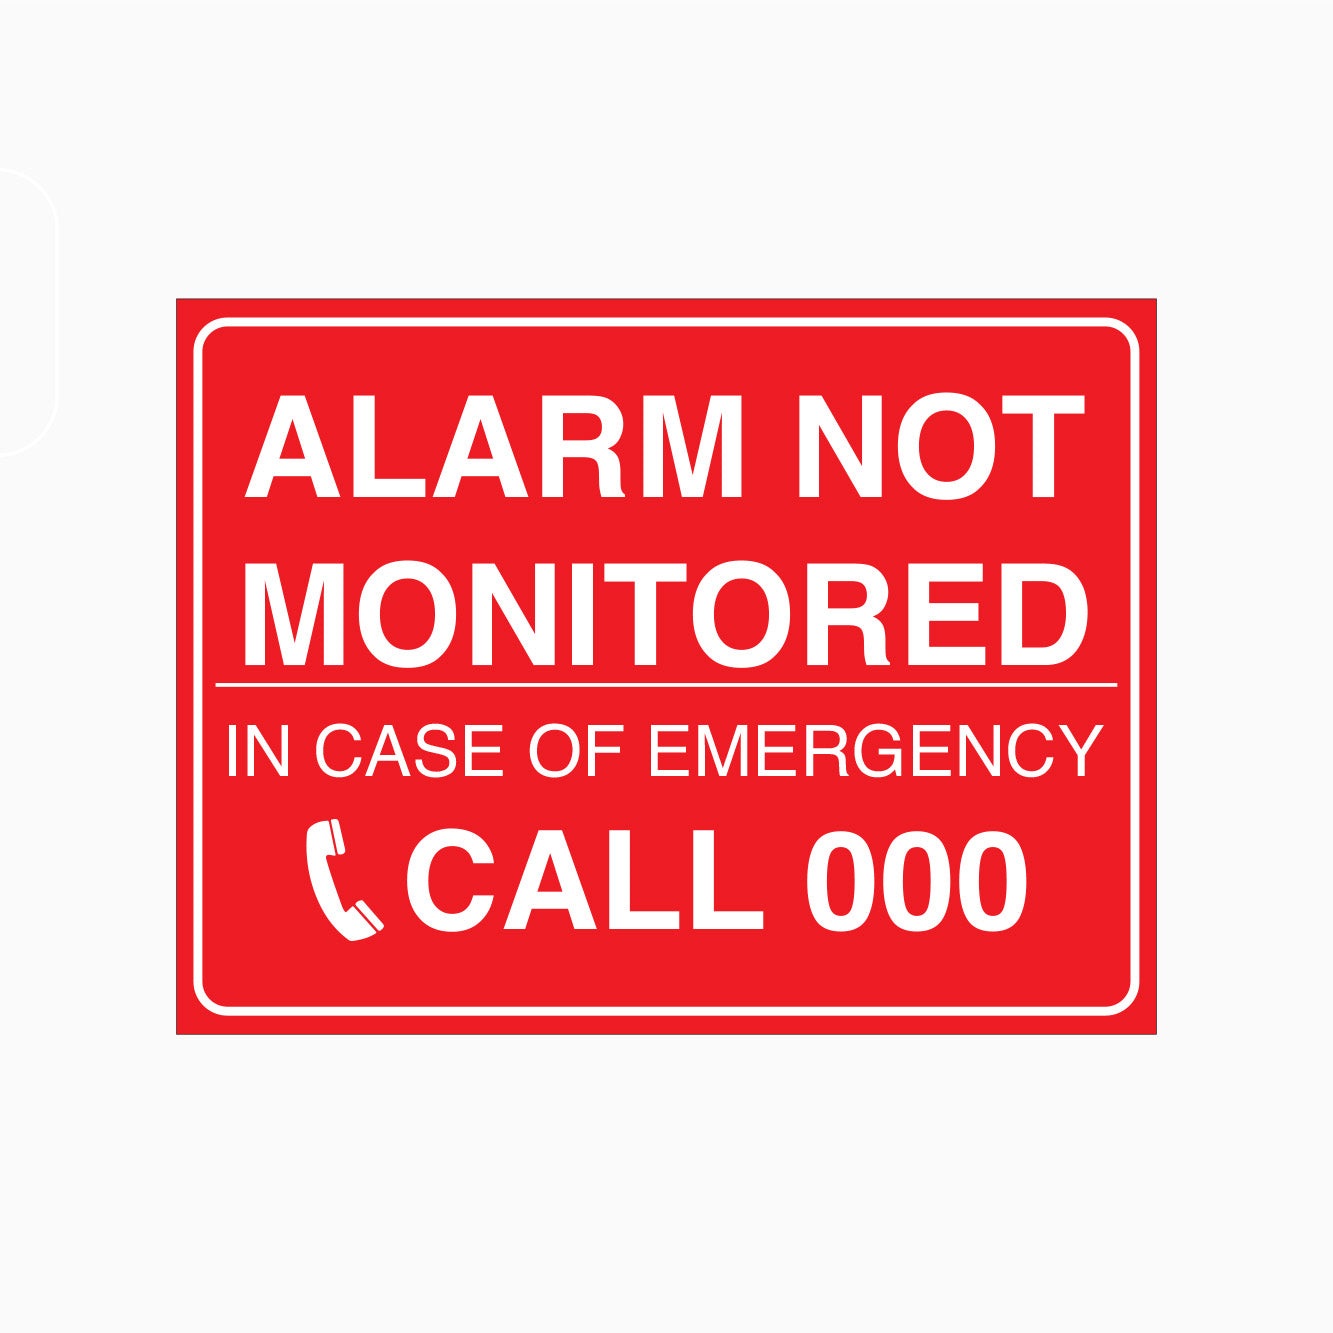 ALARM NOT MONITORED IN CASE OF EMERGENCY CALL 000 SIGN